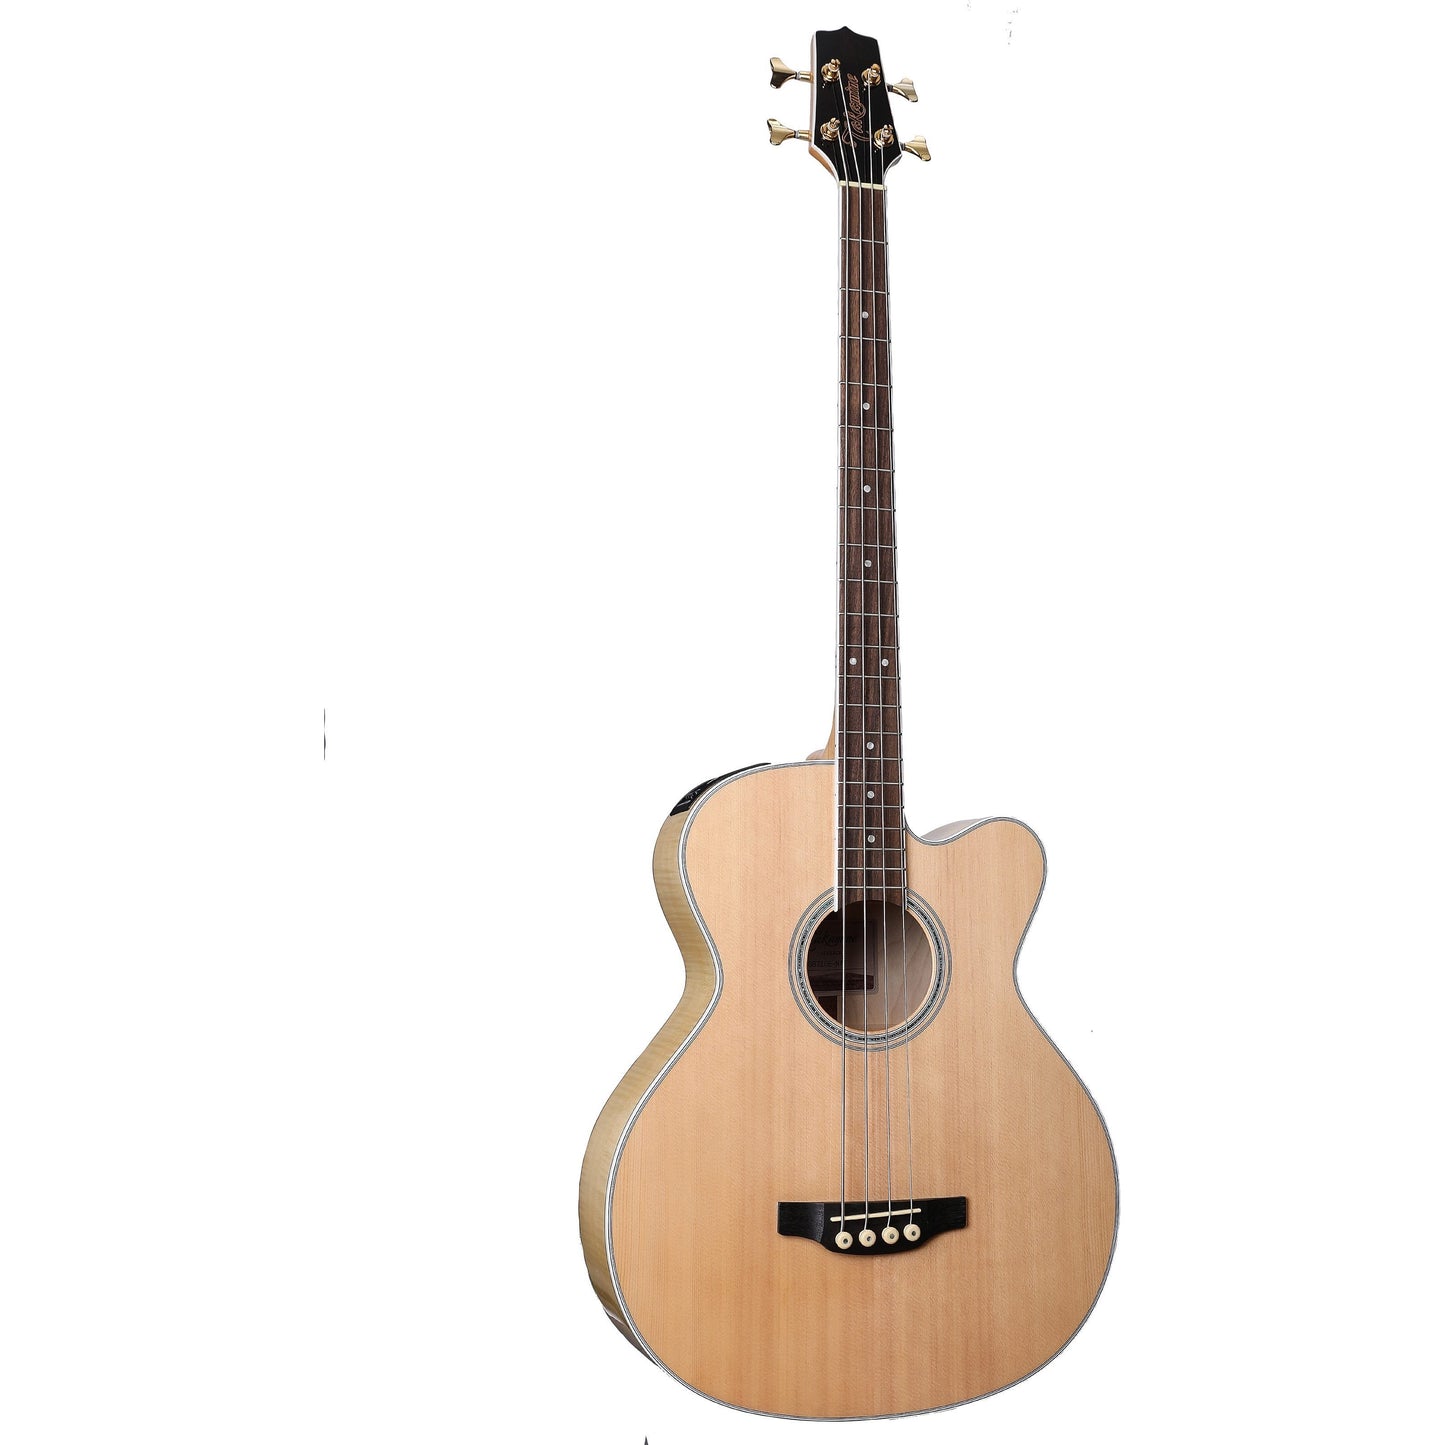 Takamine GB72CE Jumbo Acoustic-Electric Bass, Natural